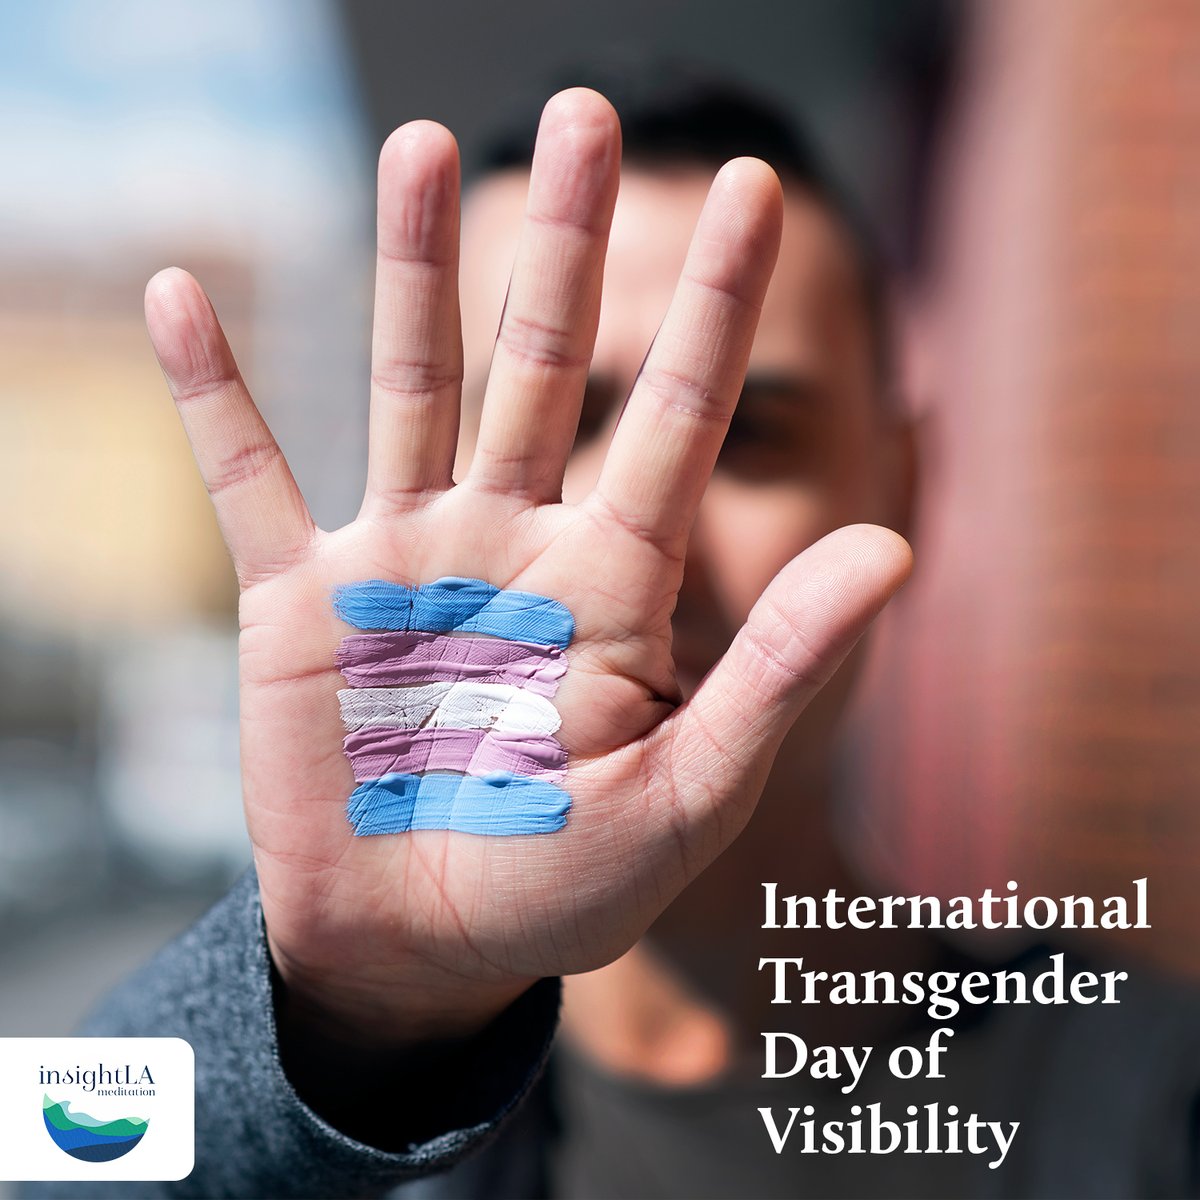 It's Transgender Day of Visibility. An annual celebration for transgender & non-binary individuals & communities; to acknowledge, show support & raise awareness of trans experiences & achievements globally. We acknowledge the courage it takes to live openly & authentically.